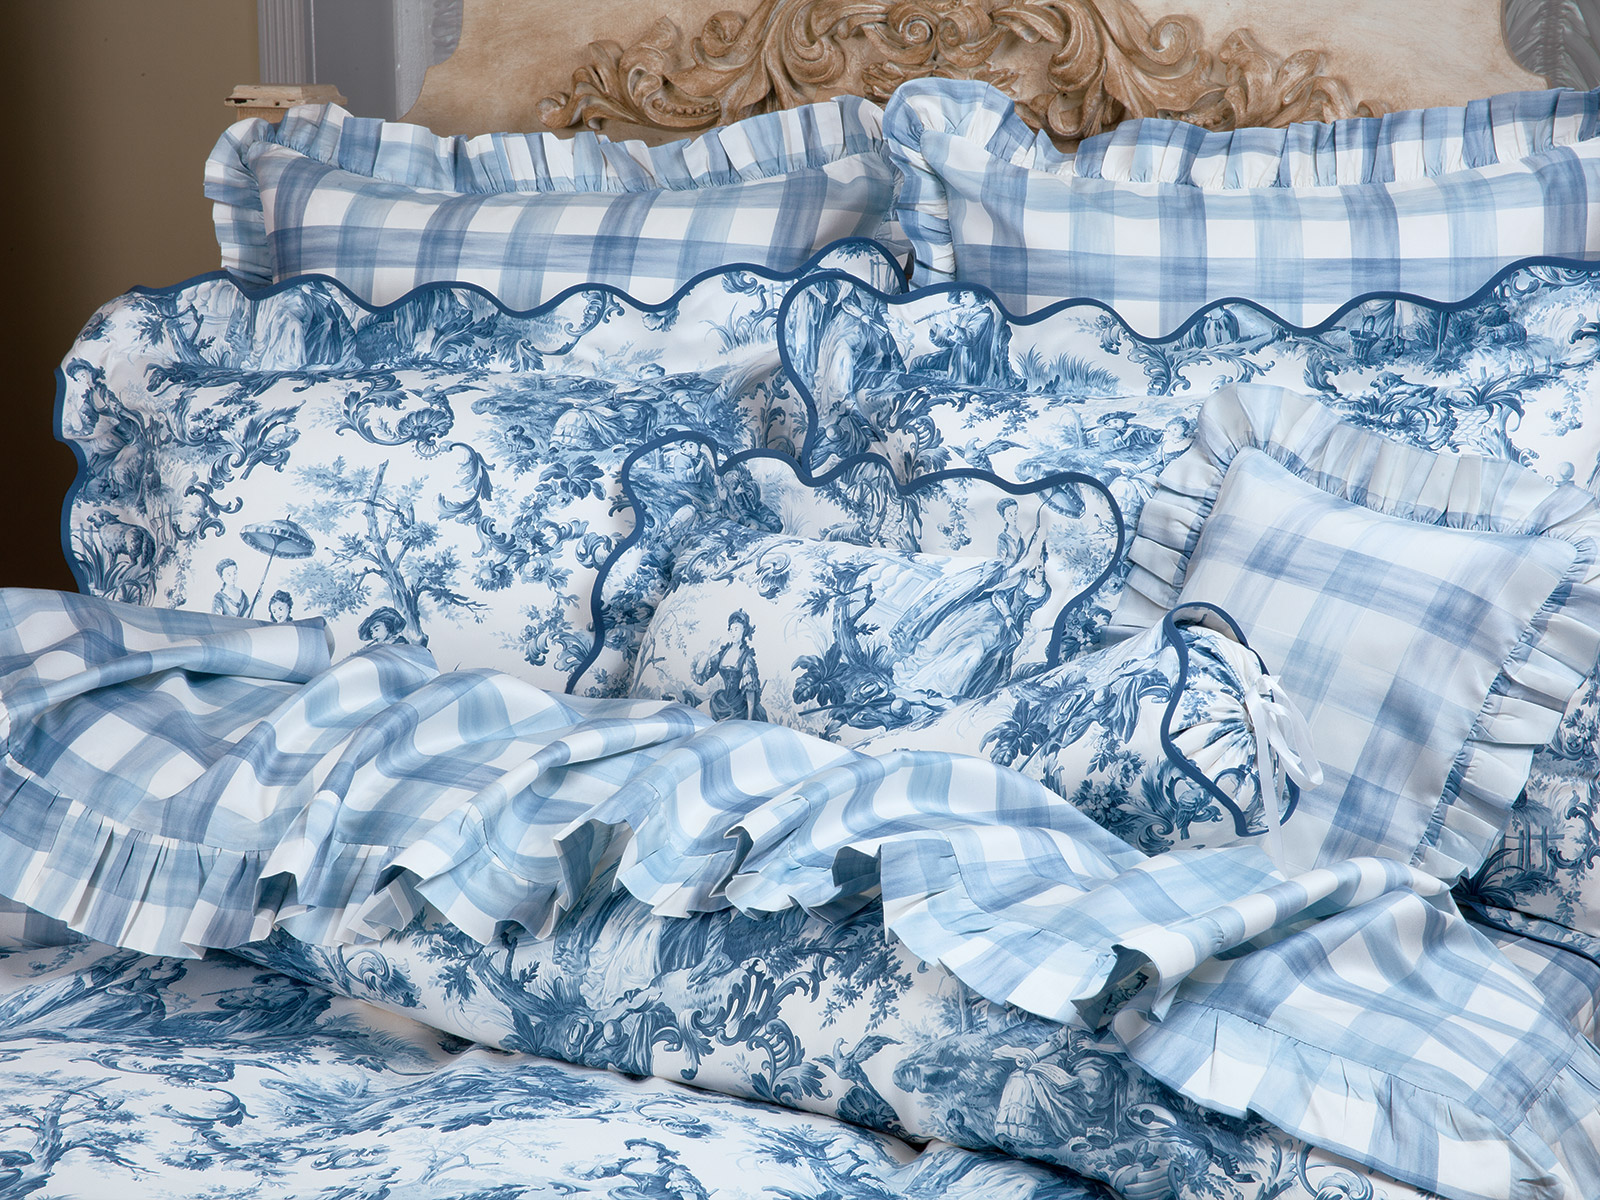  image of a Highlandia bed linens